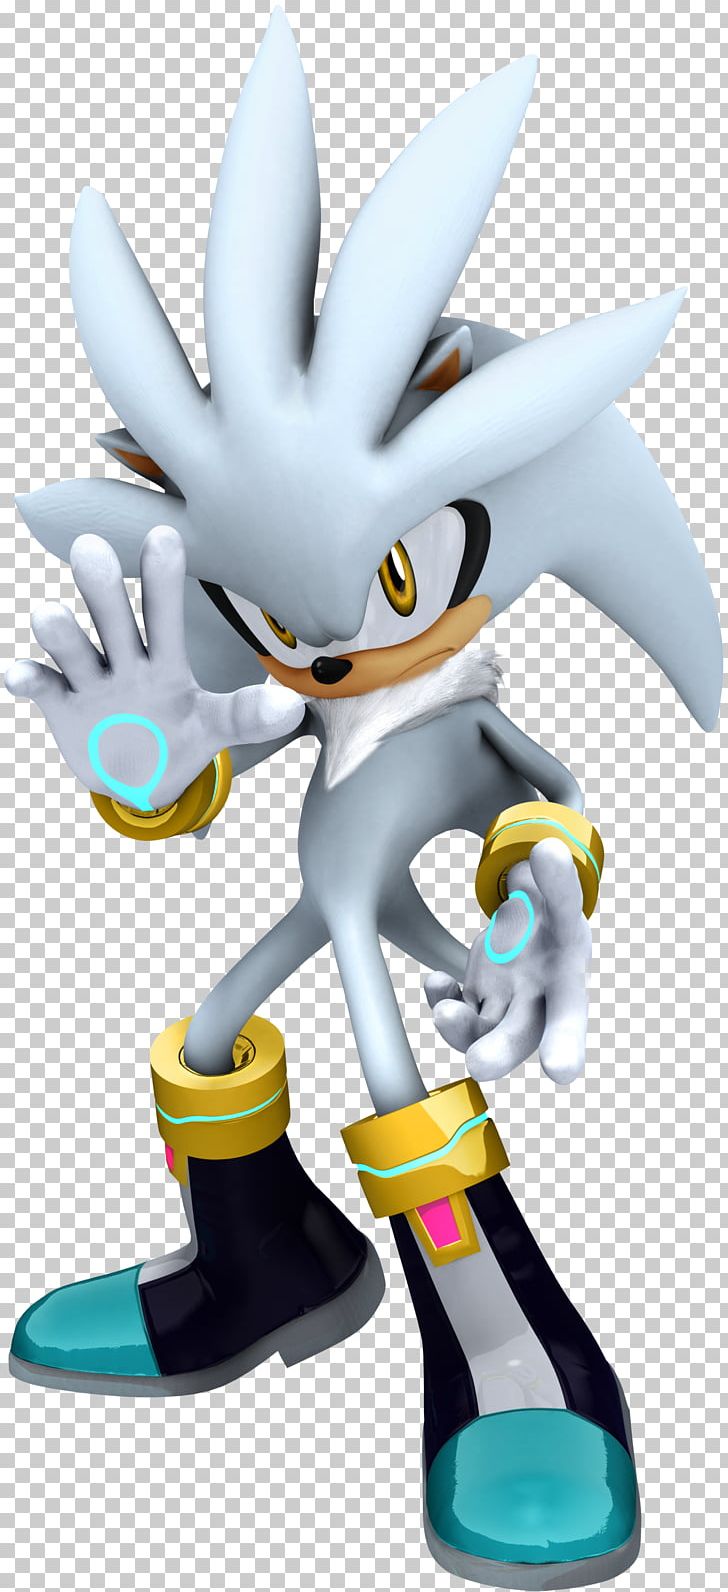 Sonic The Hedgehog Sonic Unleashed Sonic & Knuckles Doctor Eggman Knuckles The Echidna PNG, Clipart, Action Figure, Amy Rose, Blaze The Cat, Cartoon, Doctor Eggman Free PNG Download